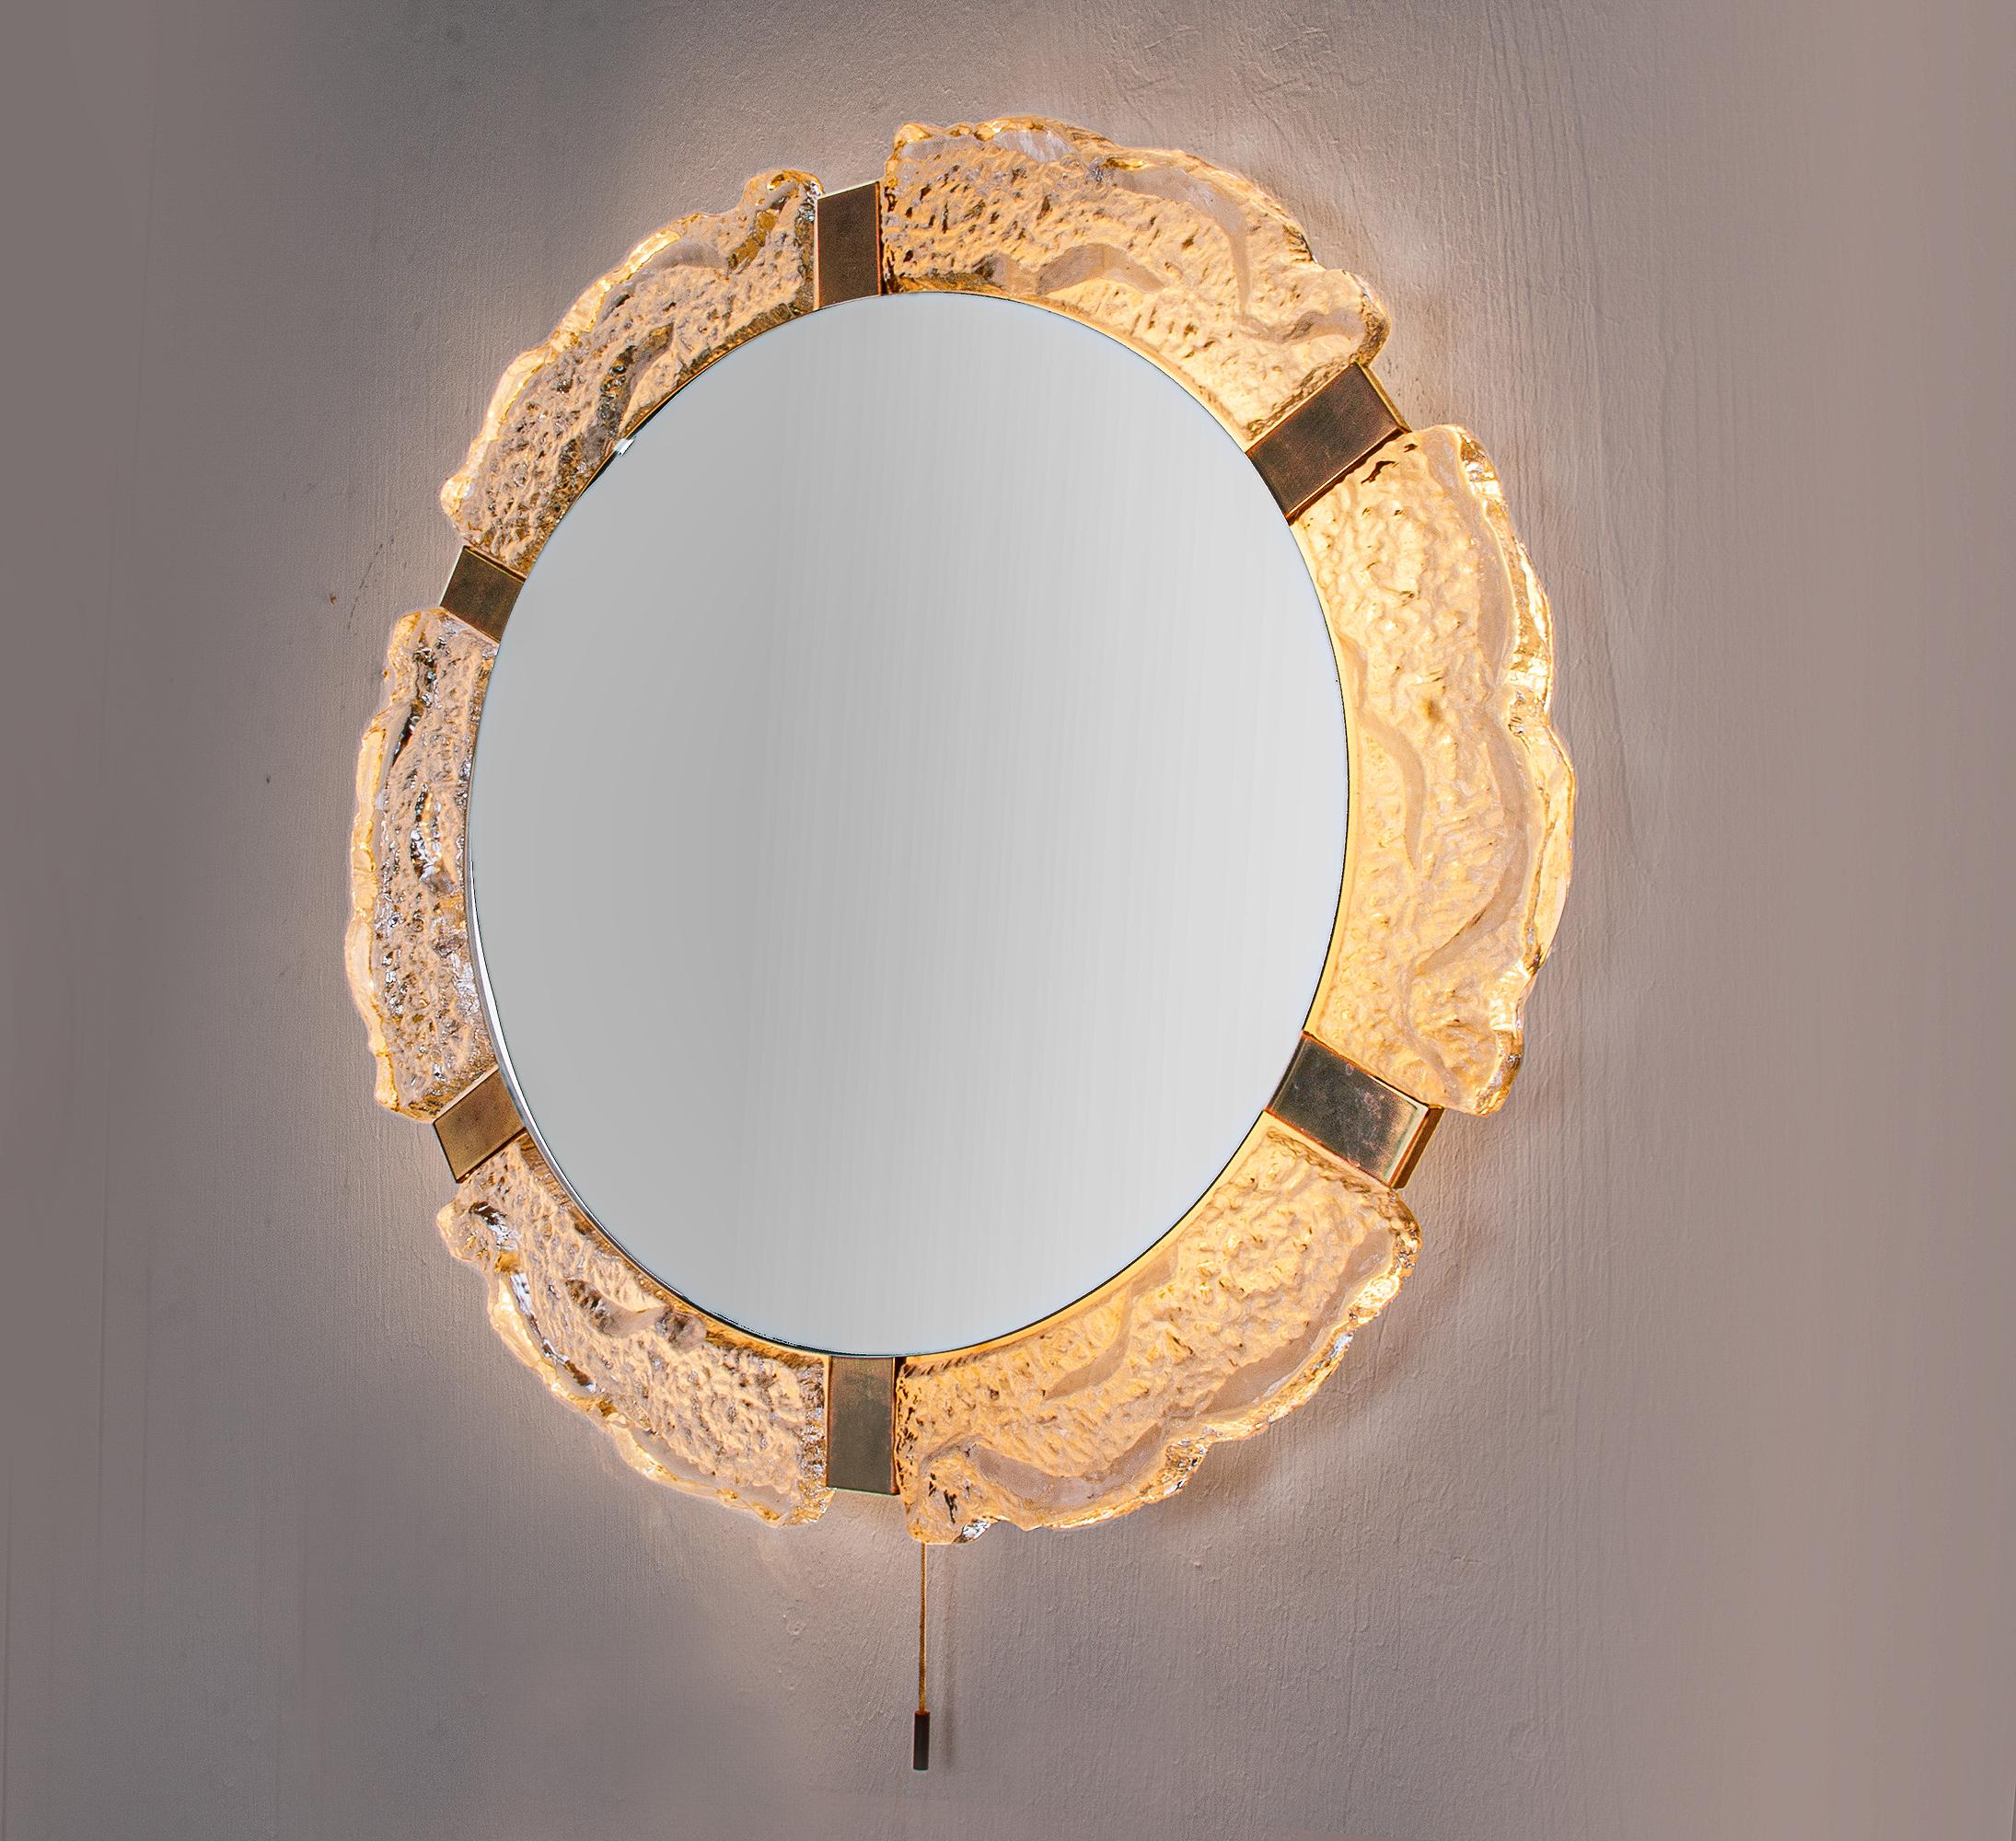 Elegant wall mirror with illuminated background. Manufactured by J.T. Kalmar, Austria in the 1960s. The frame is made of Murano ice glass with brass hardware. 

Measures: diameter 21.65” in. (55 cm), depth 3.9” in. (10 cm). 
Lighting: takes four